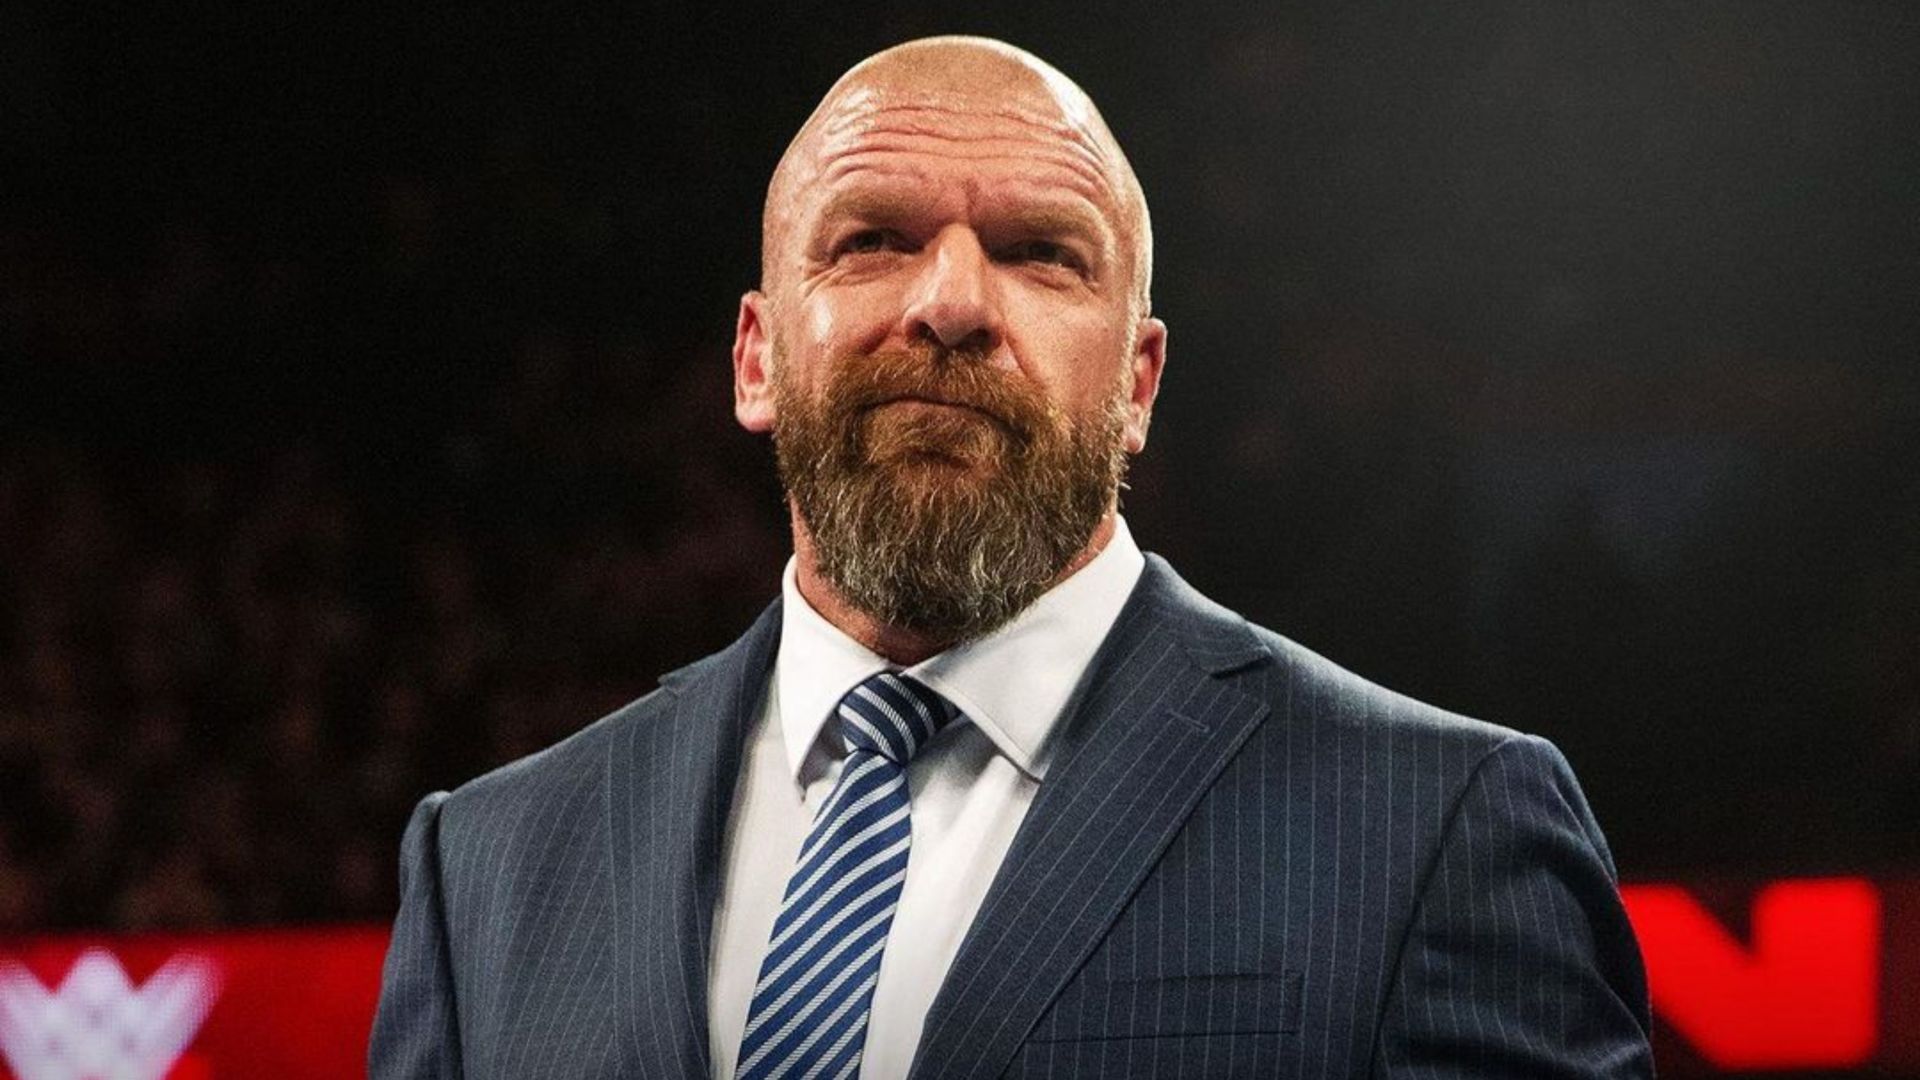 WWE Chief Content Officer Triple H (Image credit: WWE